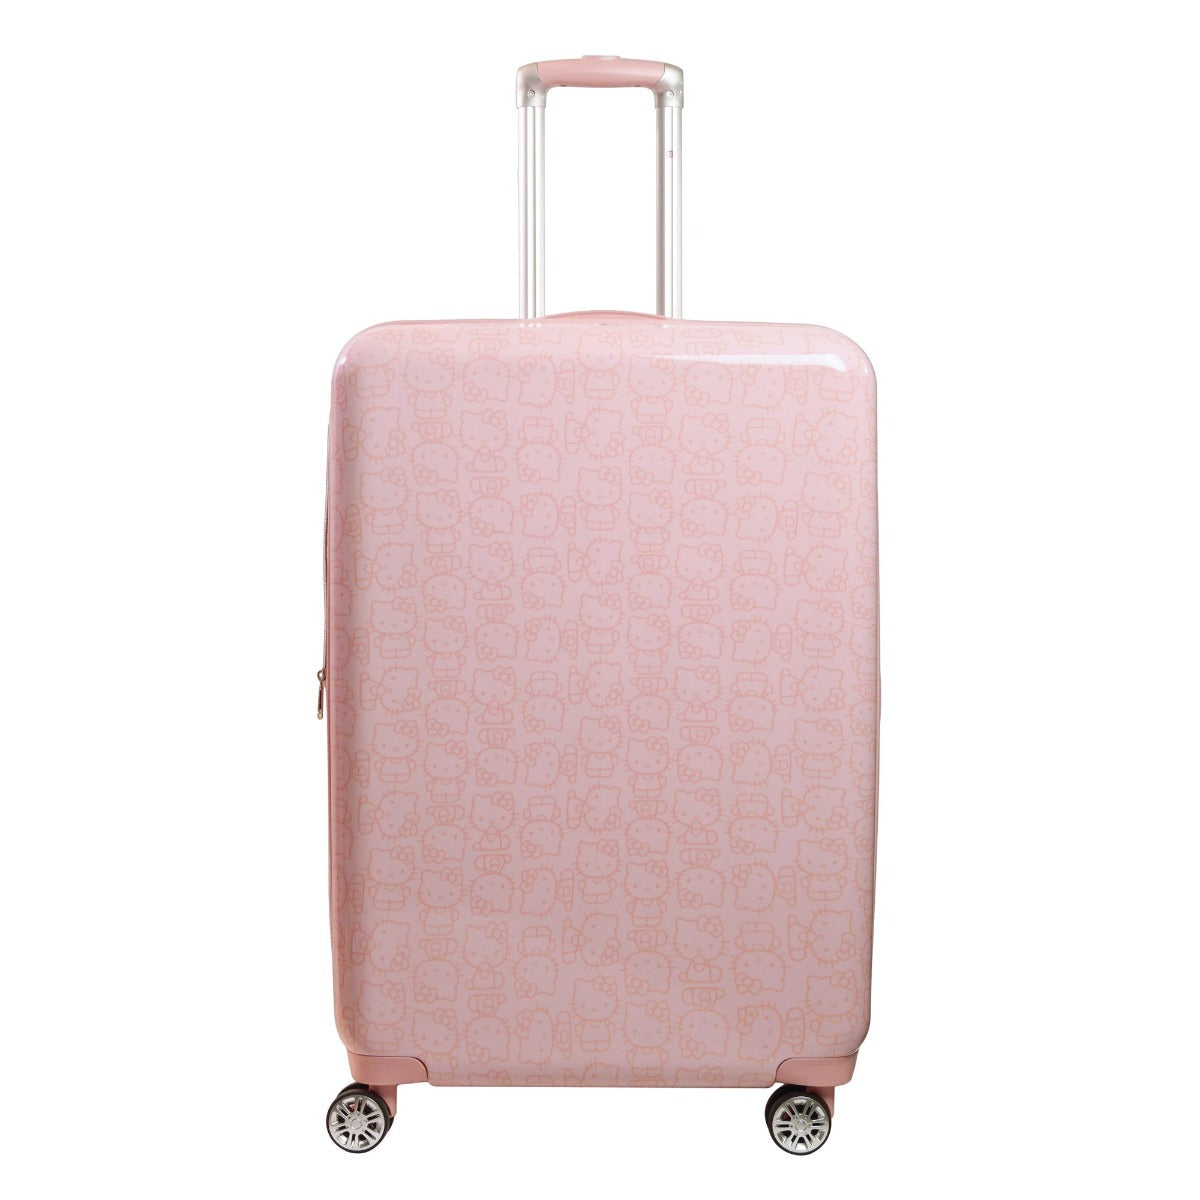 Hello Kitty Pose All Over Print 29.5" Hard-Sided Luggage Pink checked spinner suitcase